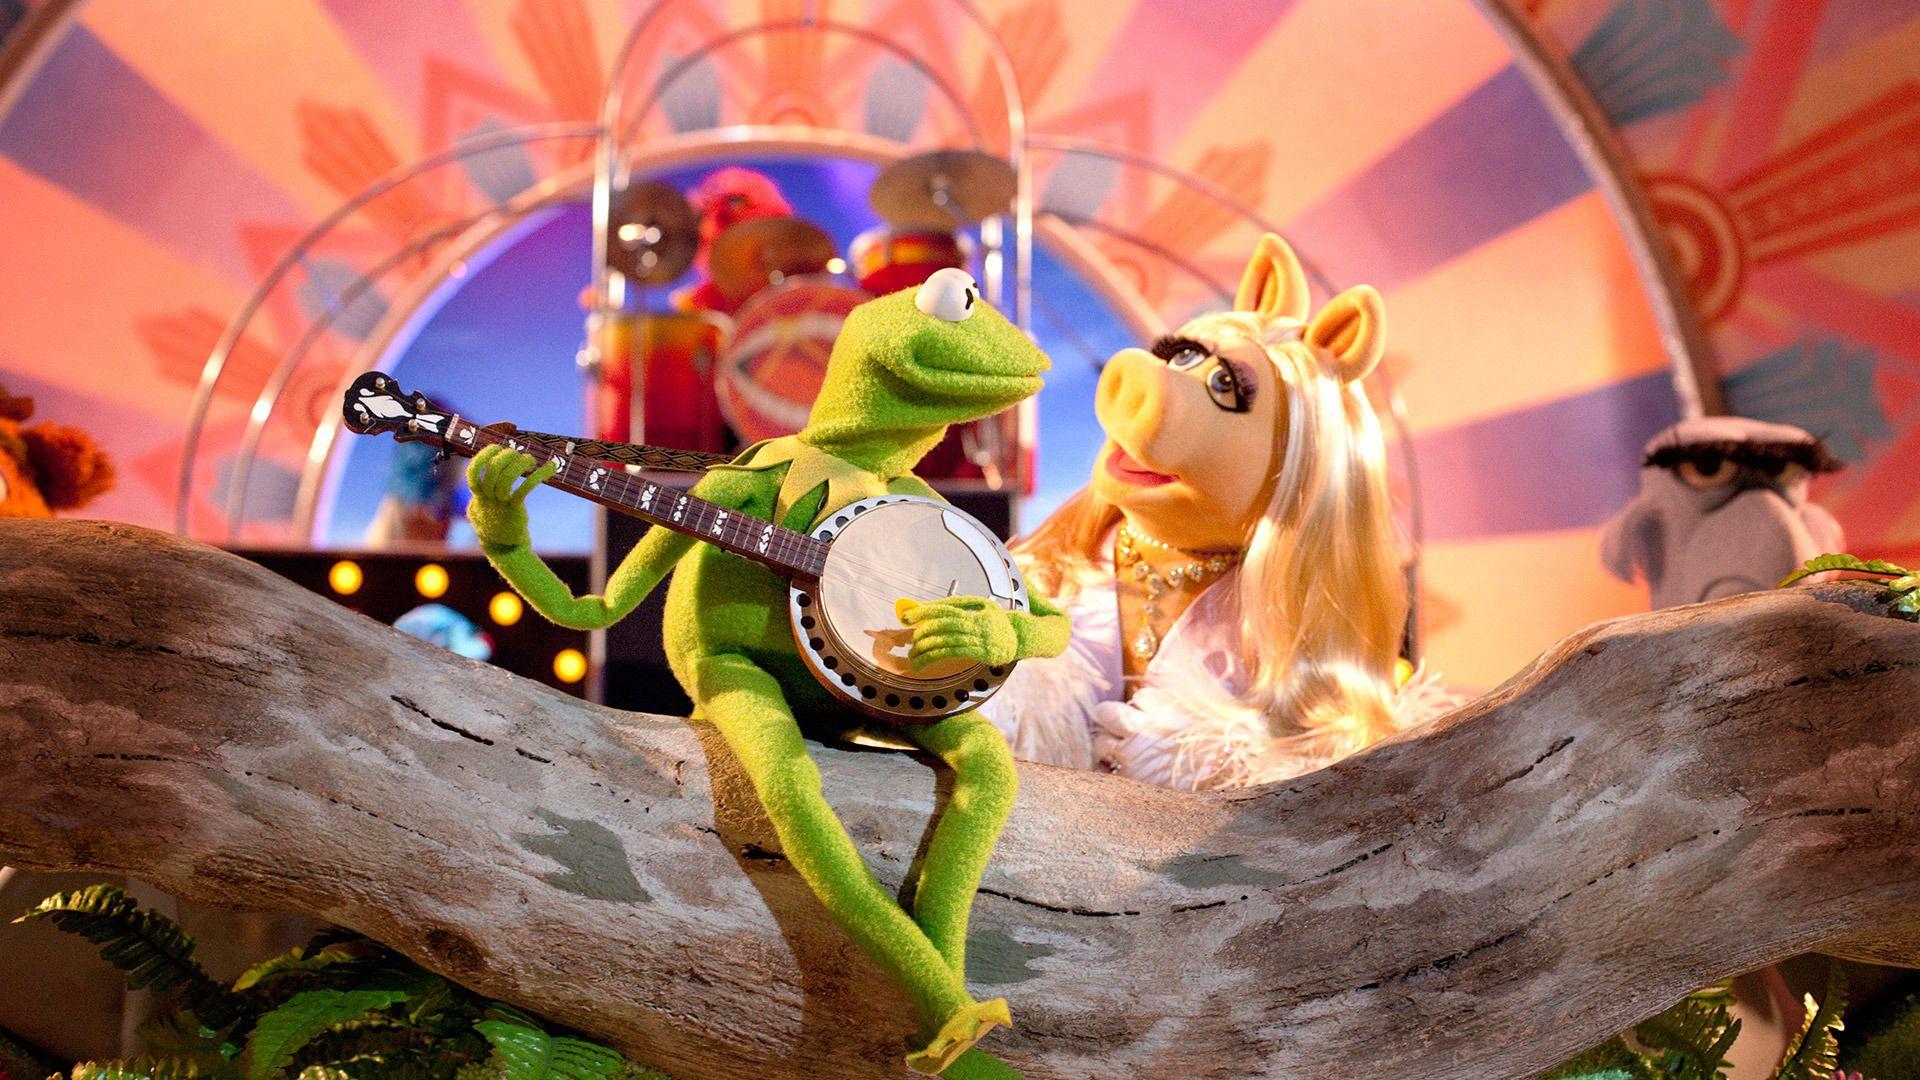 The Muppets Wallpapers Wallpaper Cave